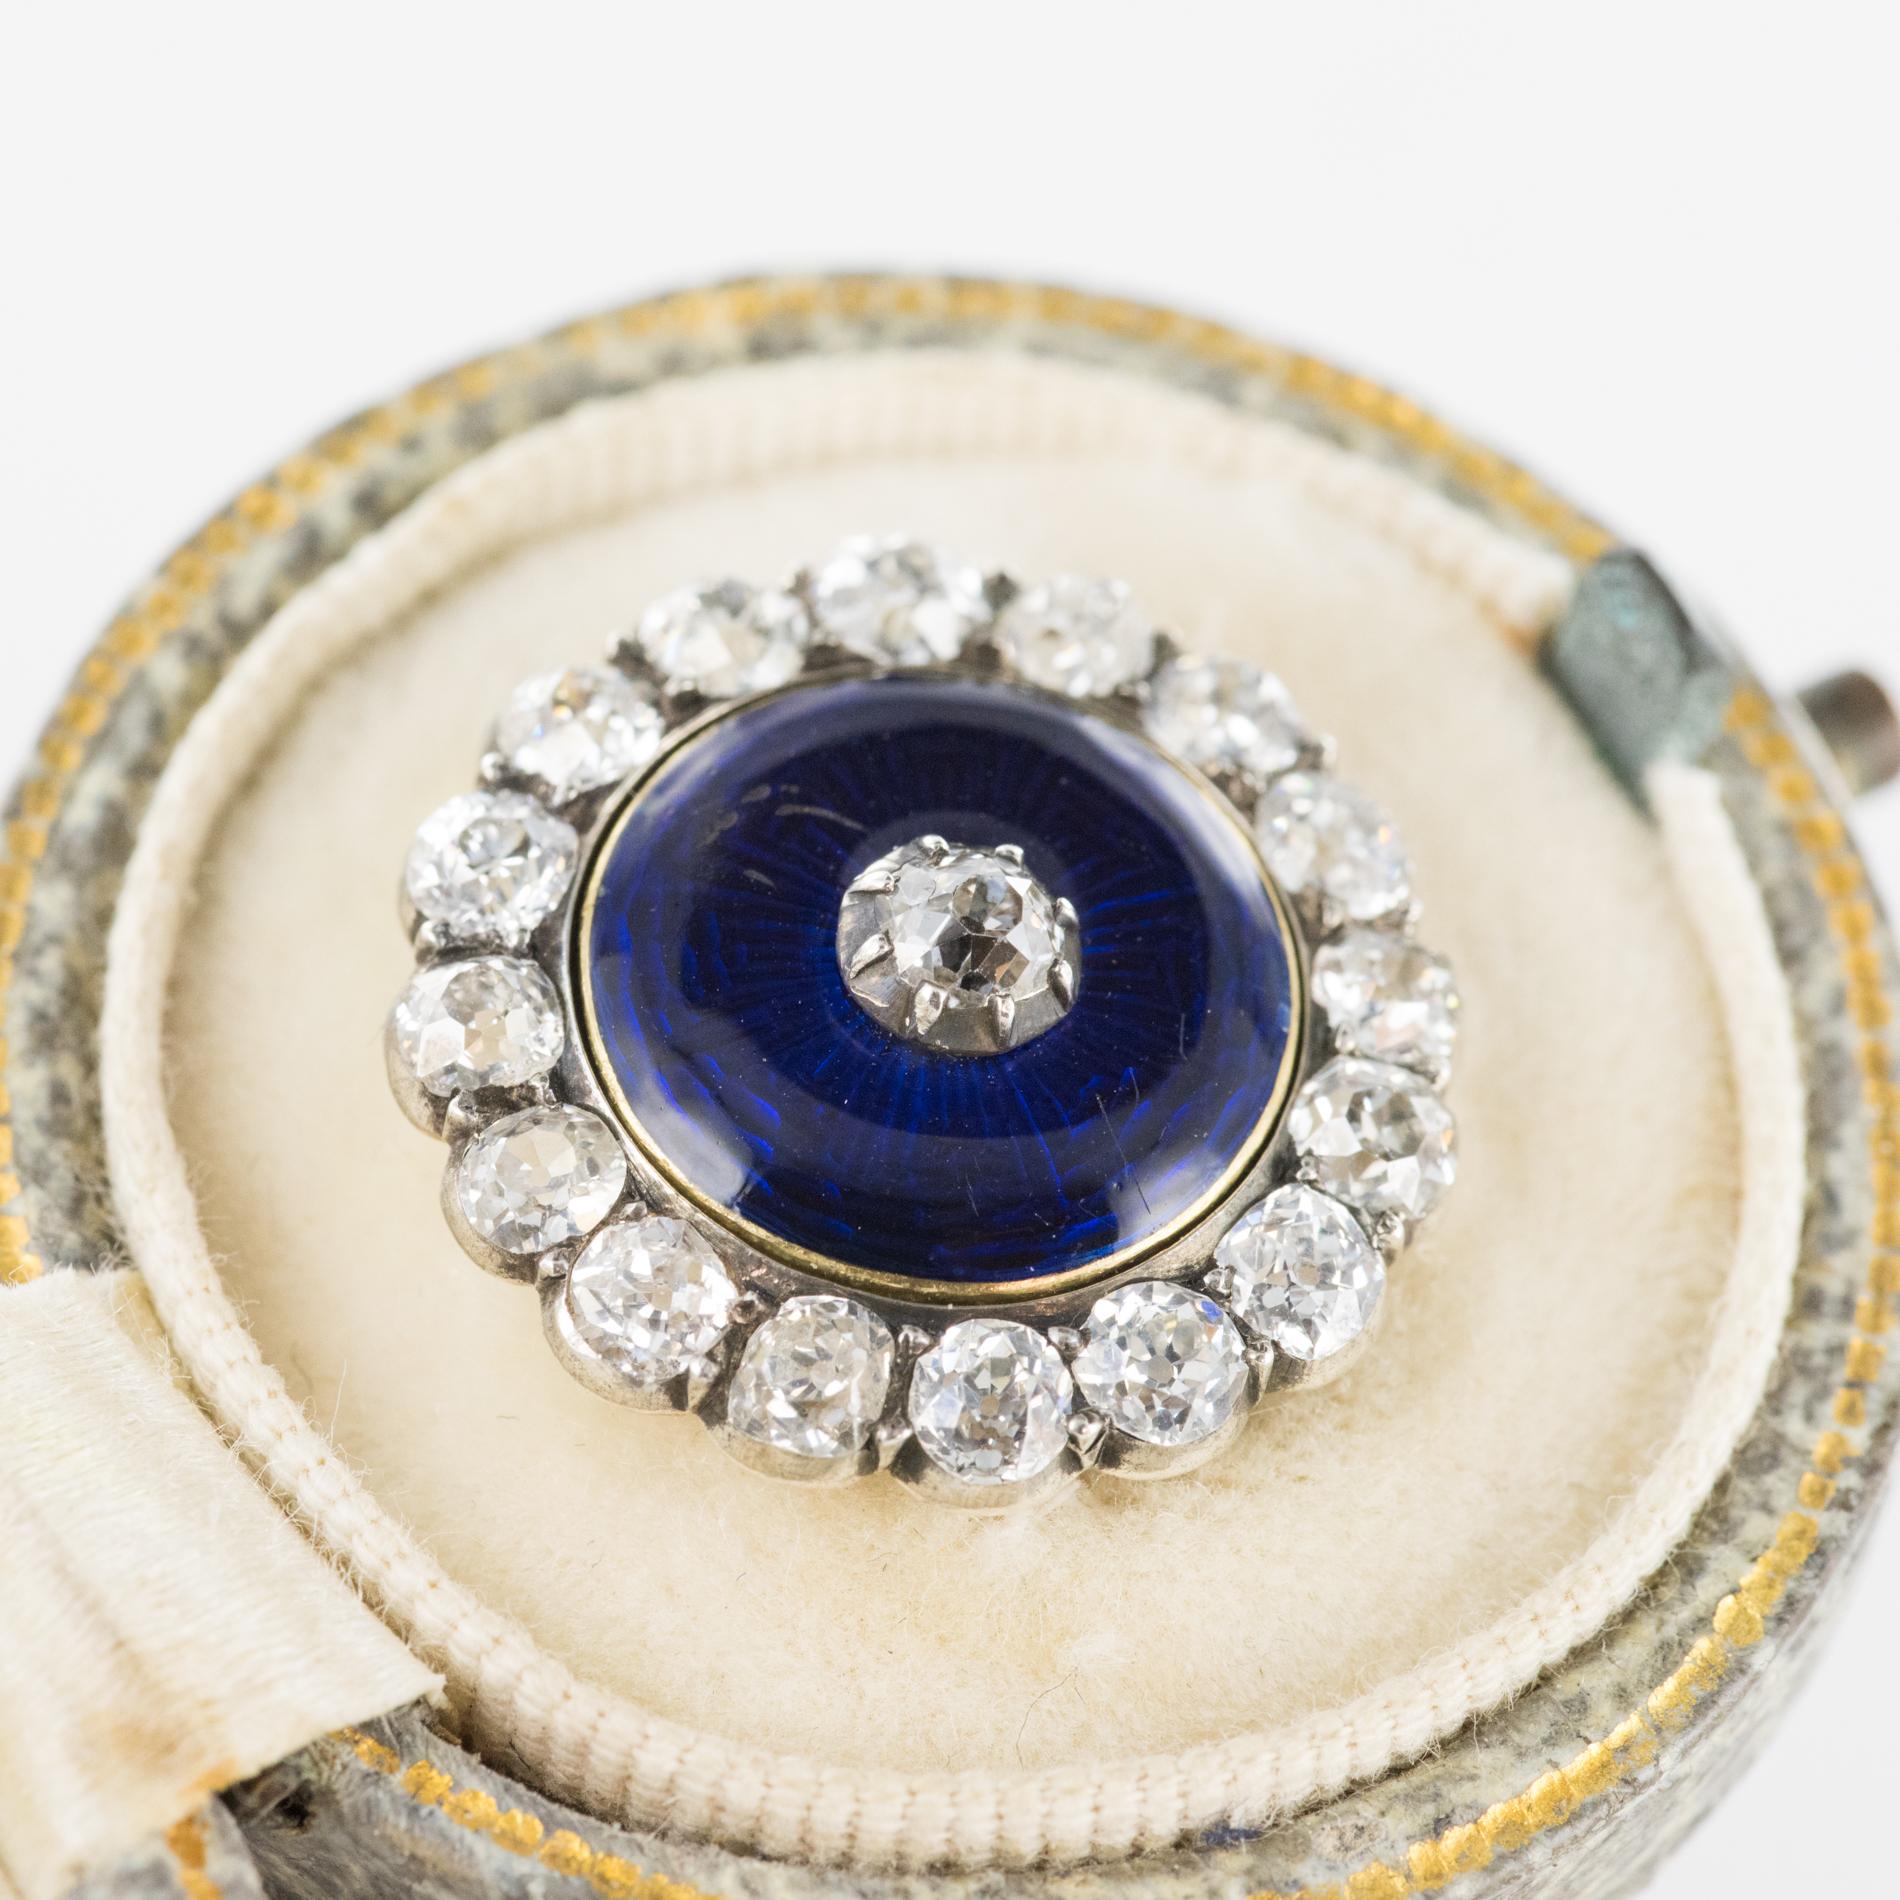 19th century brooches